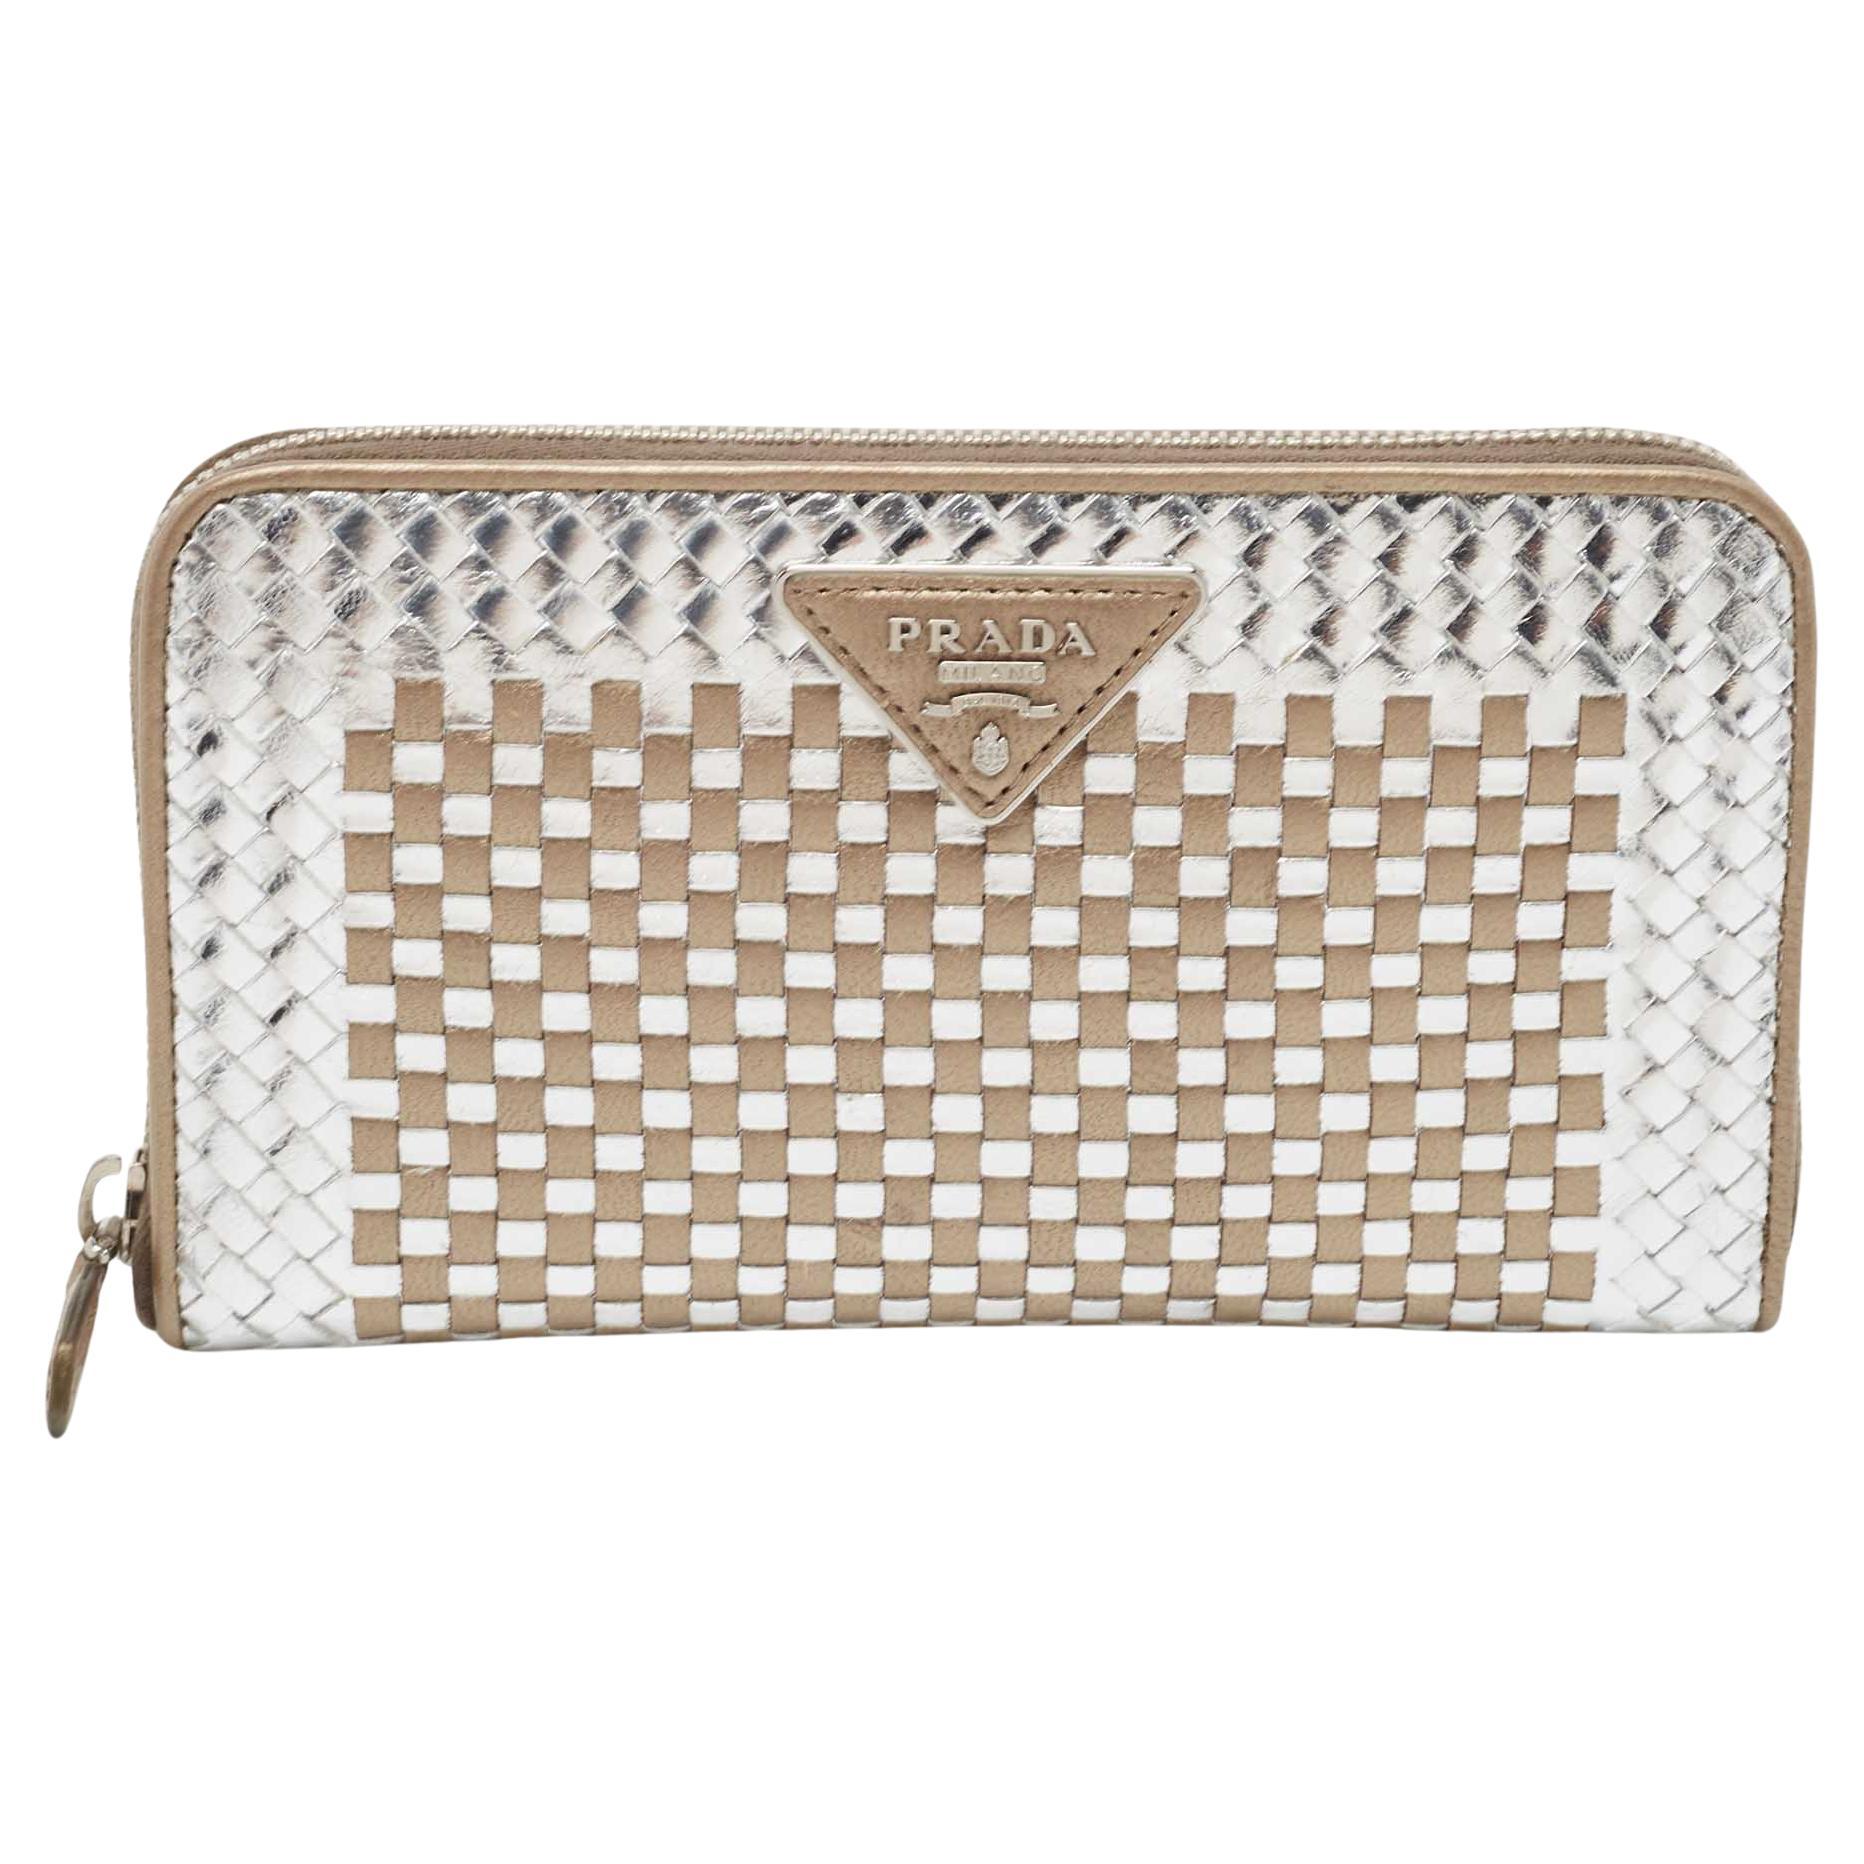 Prada Gold/Silver Woven Madras Leather Zip Around Wallet For Sale